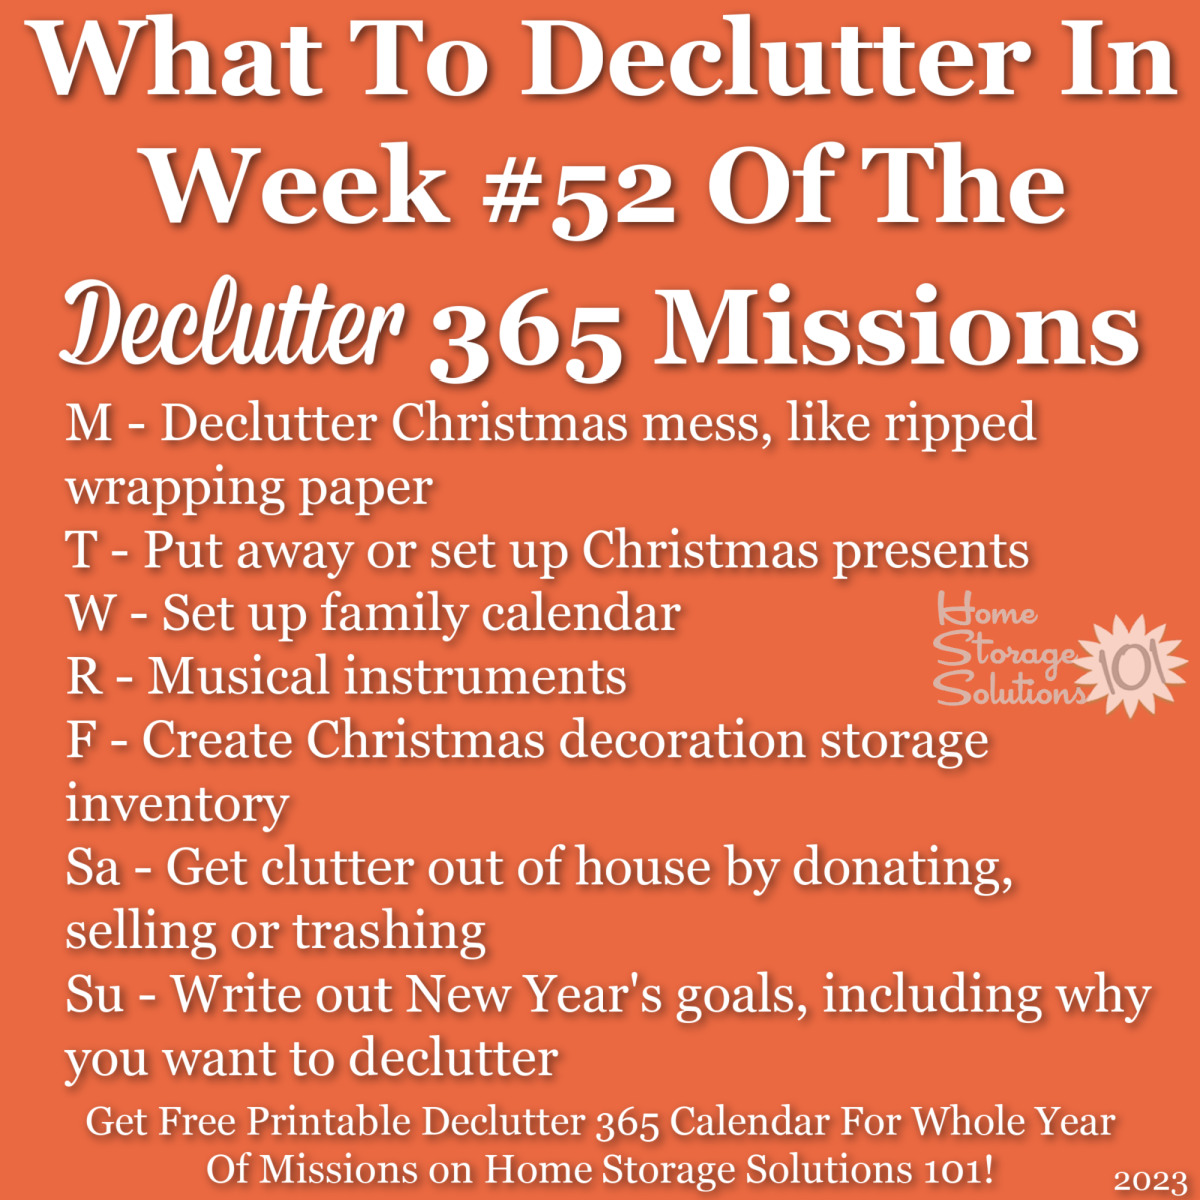 What to declutter in week #52 of the Declutter 365 missions {get a free printable Declutter 365 calendar for a whole year of missions on Home Storage Solutions 101!}